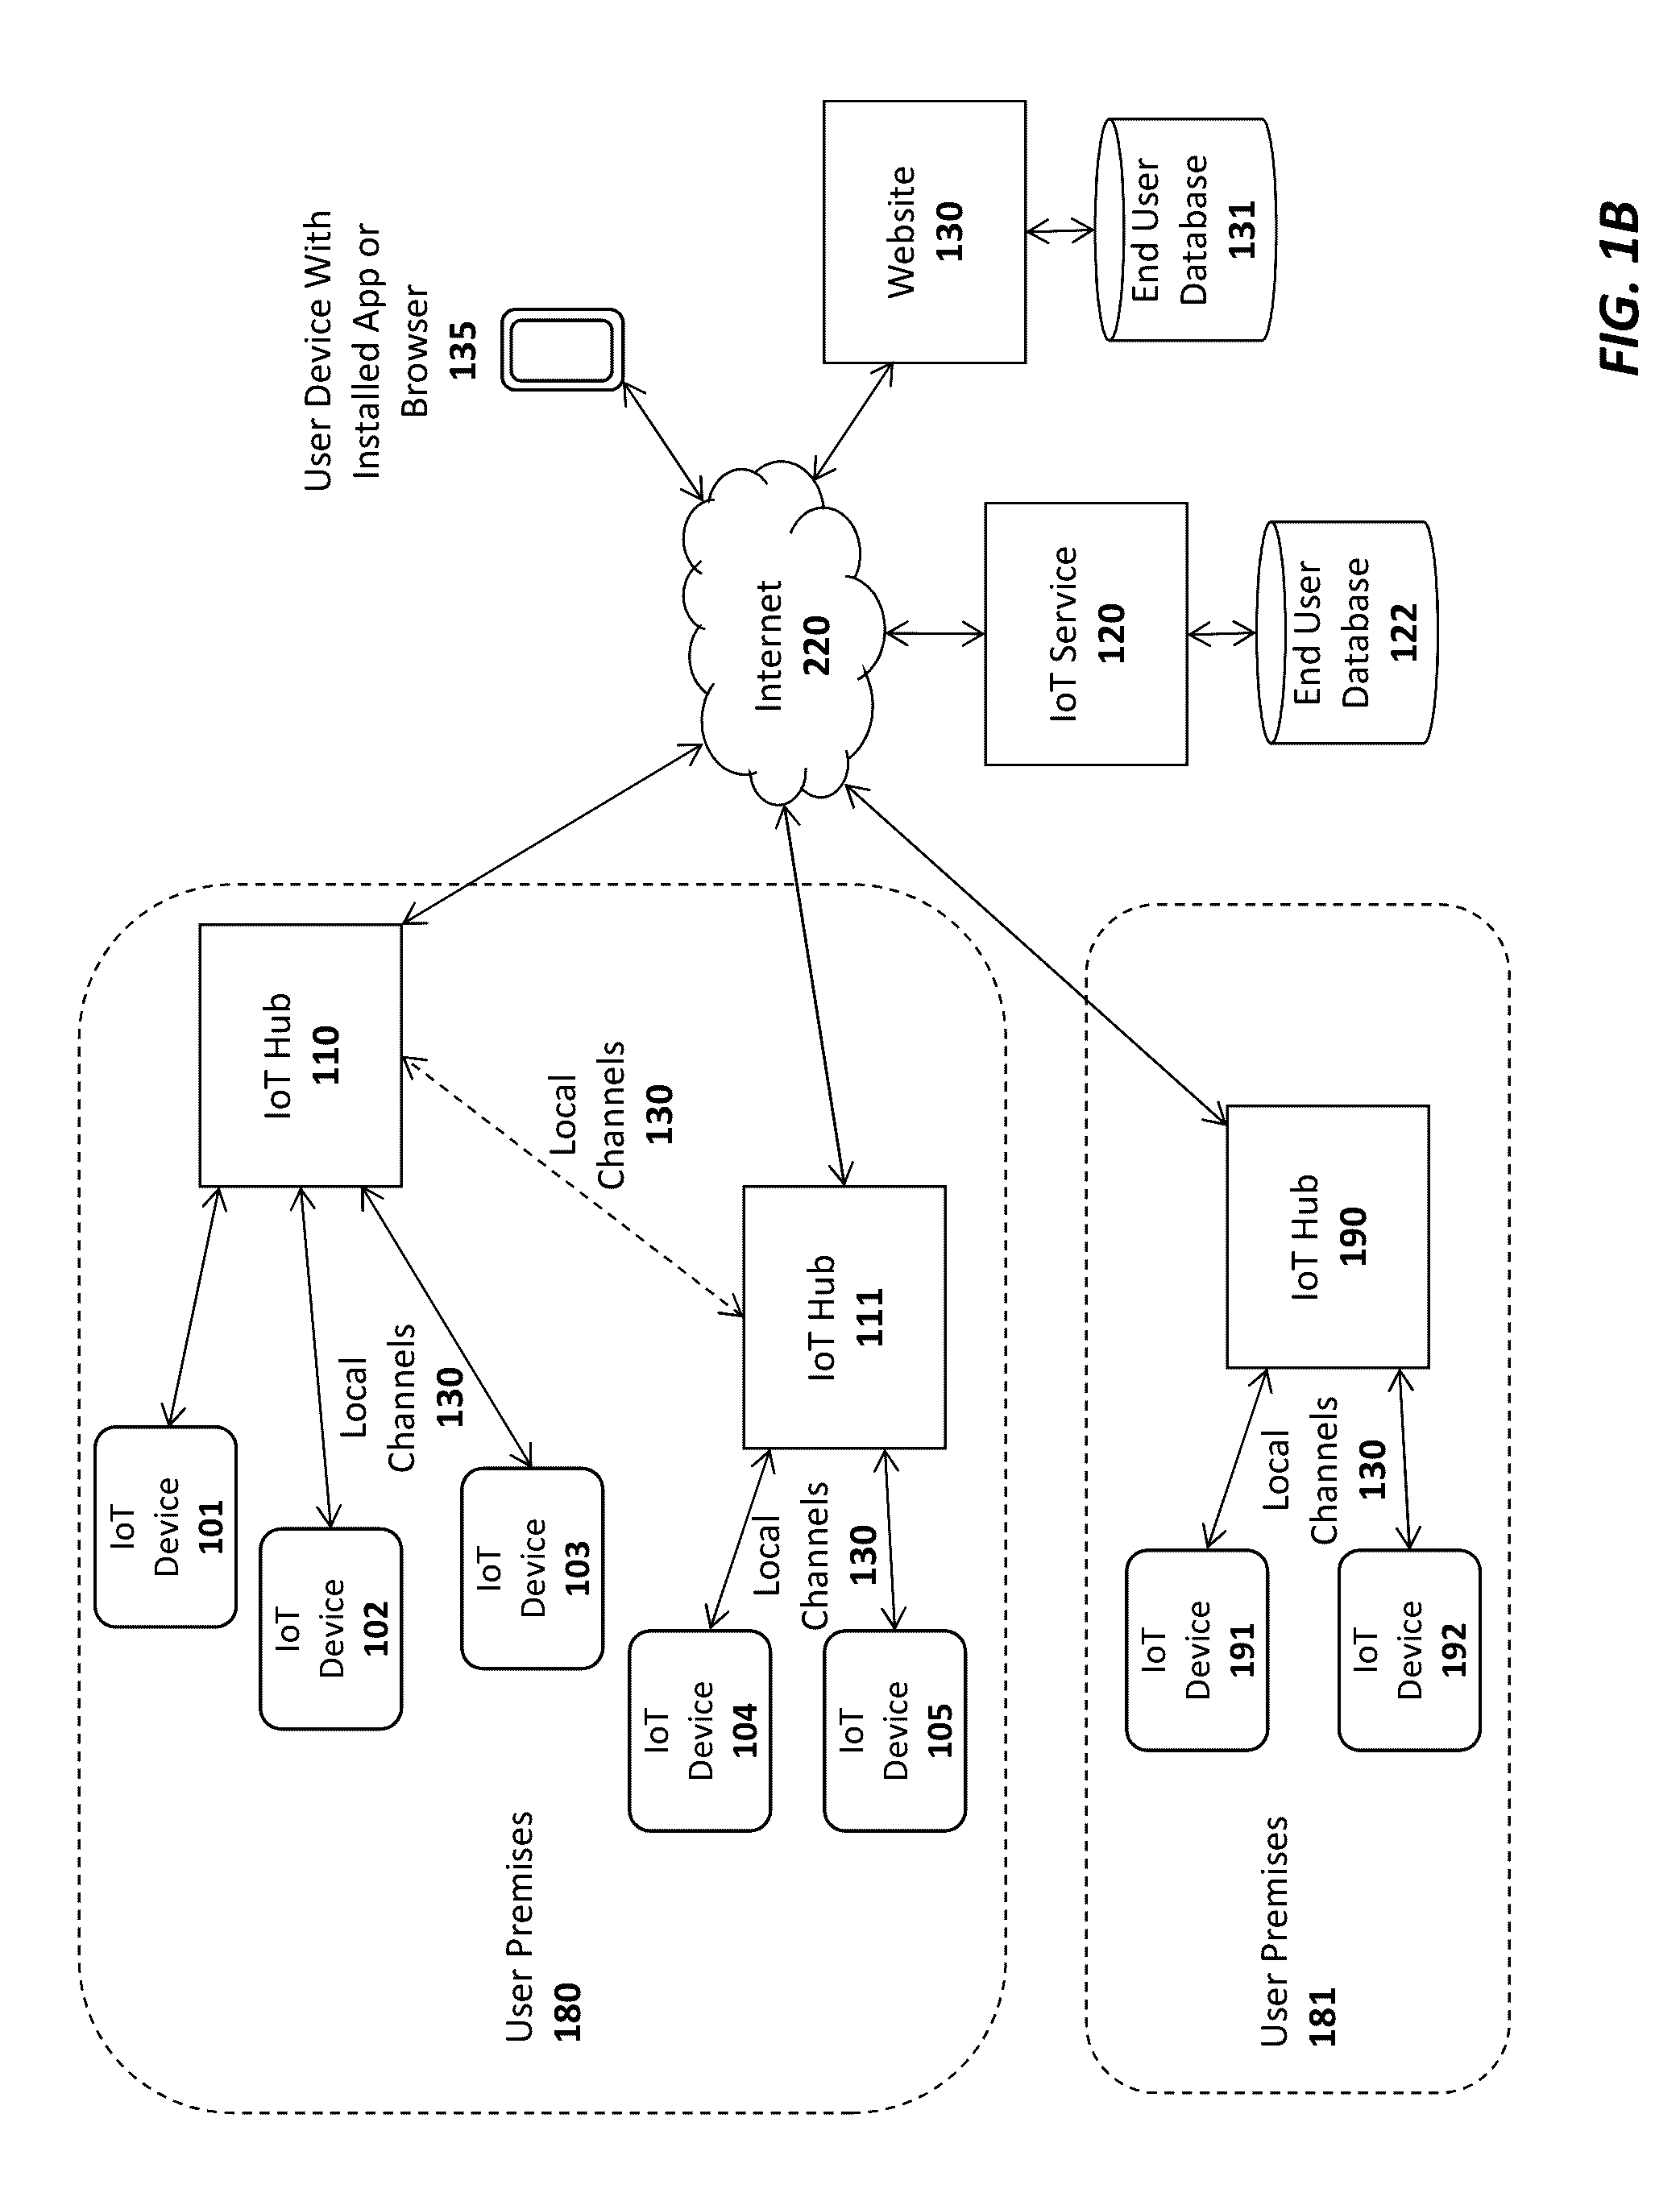 Apparatus and method for accurate barcode scanning using dynamic timing feedback